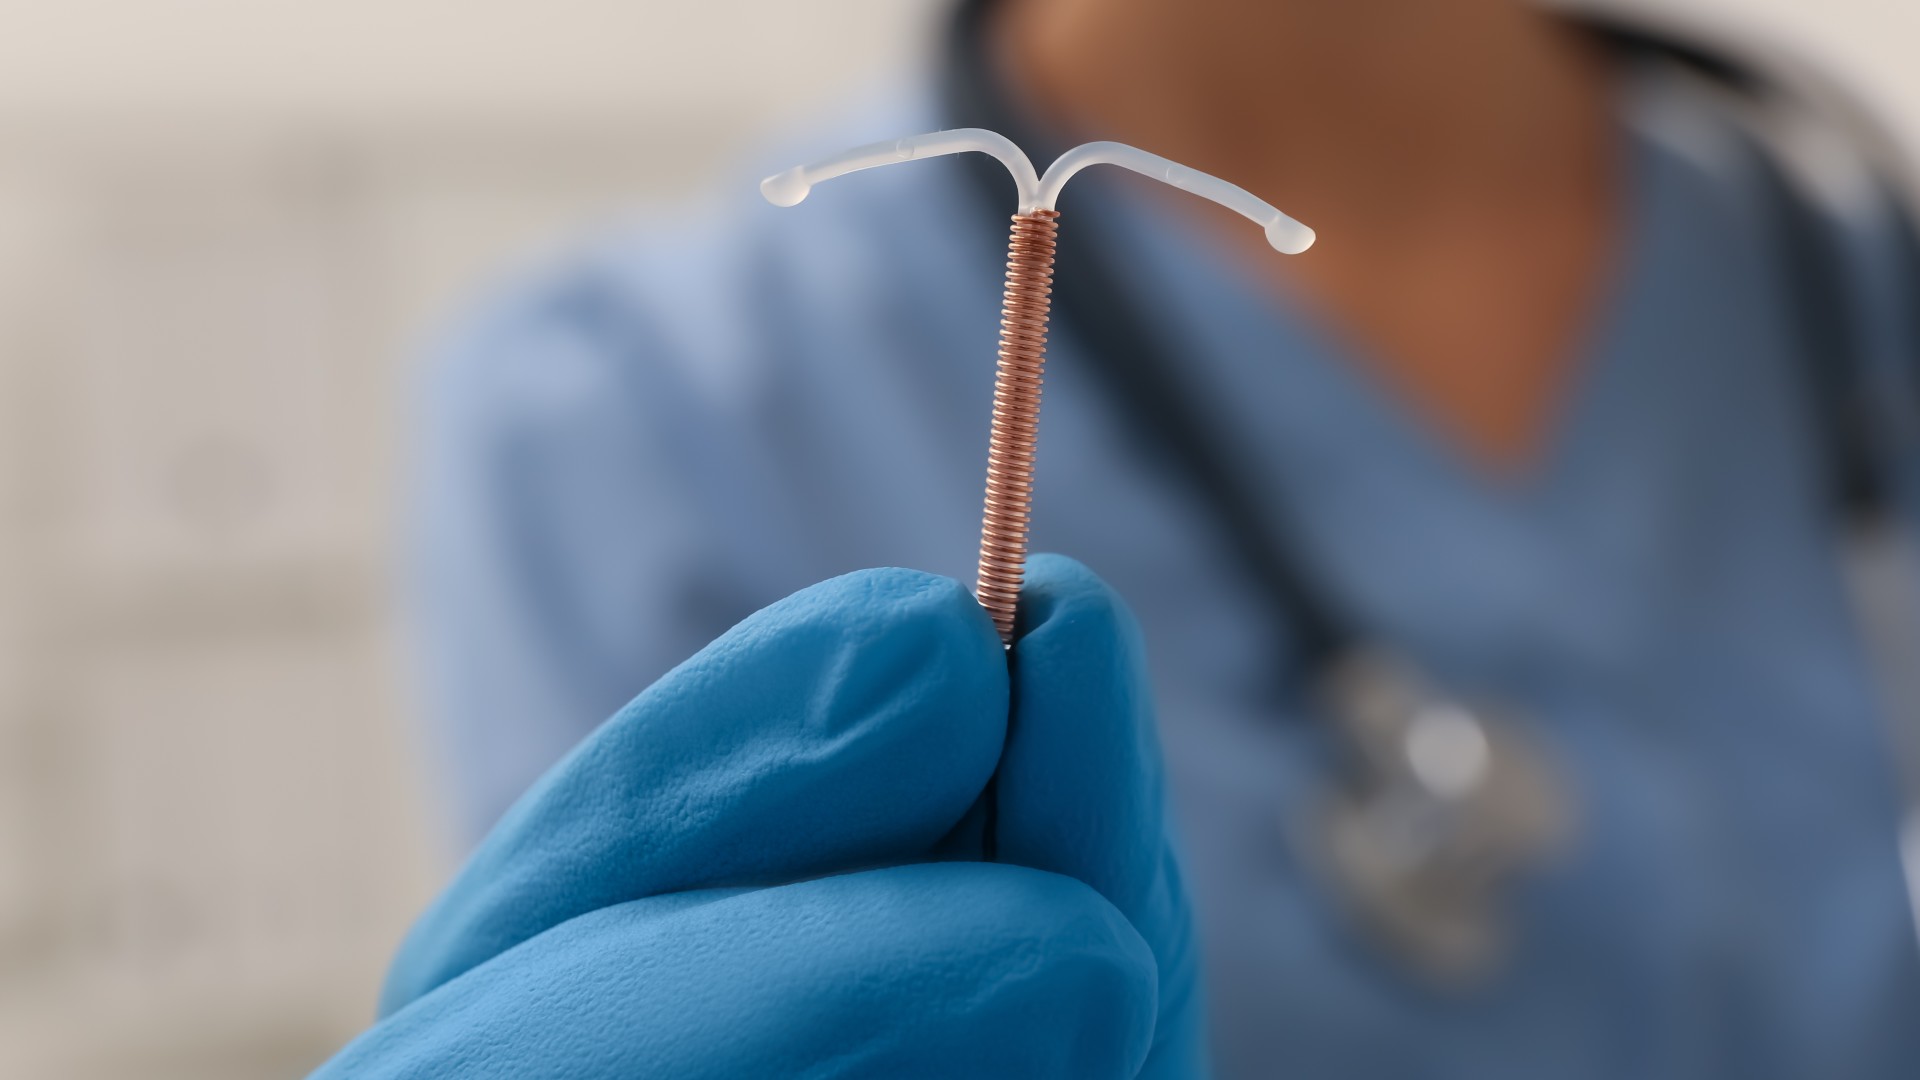 Doctor holding a T-shaped intrauterine device (IUD) made out of copper on blurred background, close up_New Africa via Shutterstock